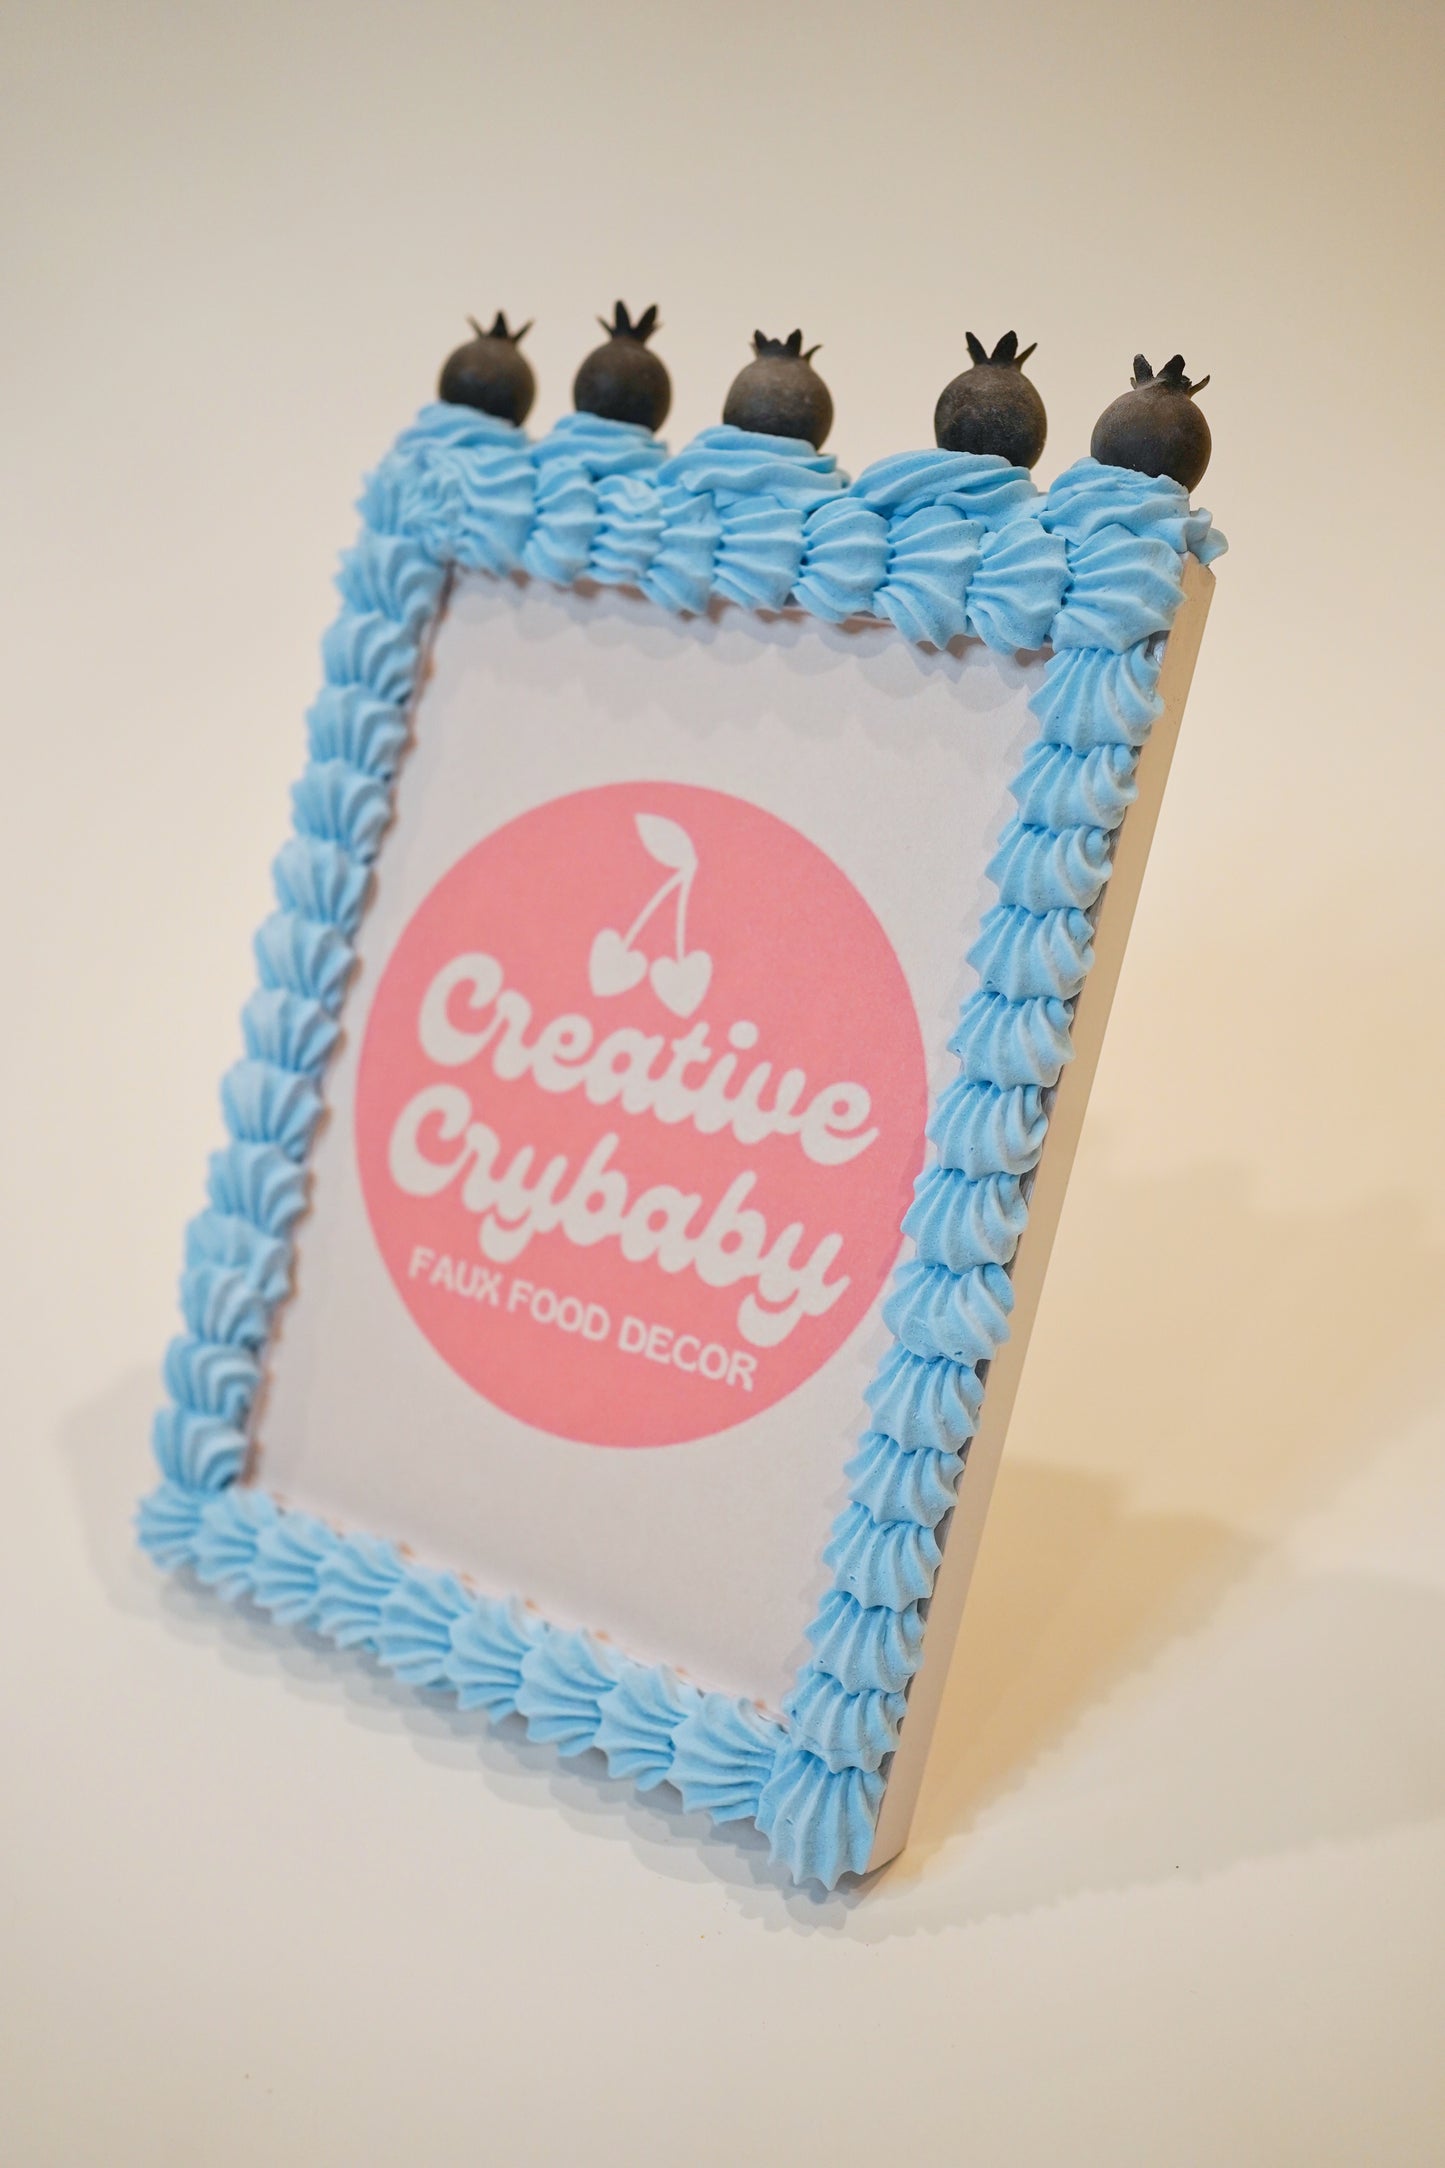 Blueberry Cake Picture Frame with Blue Frosting